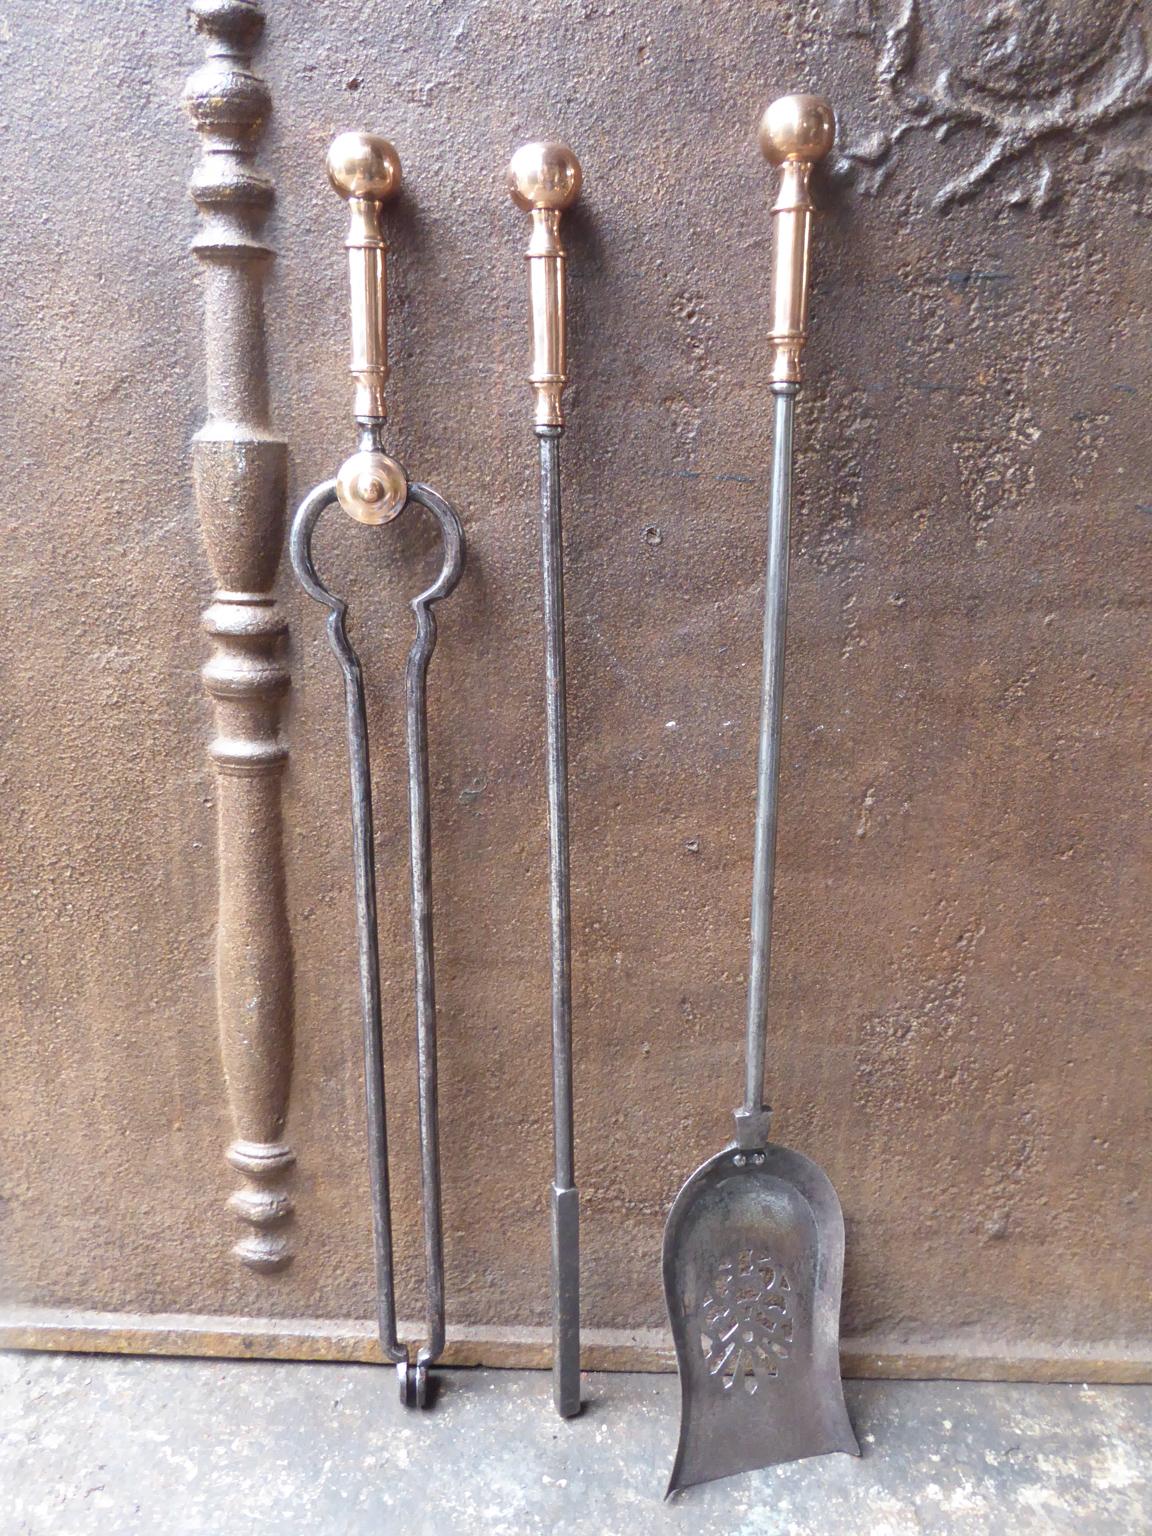 19th century English Victorian set of three tools made of polished steel and polished copper. The set is in a good condition and is fully functional.







   